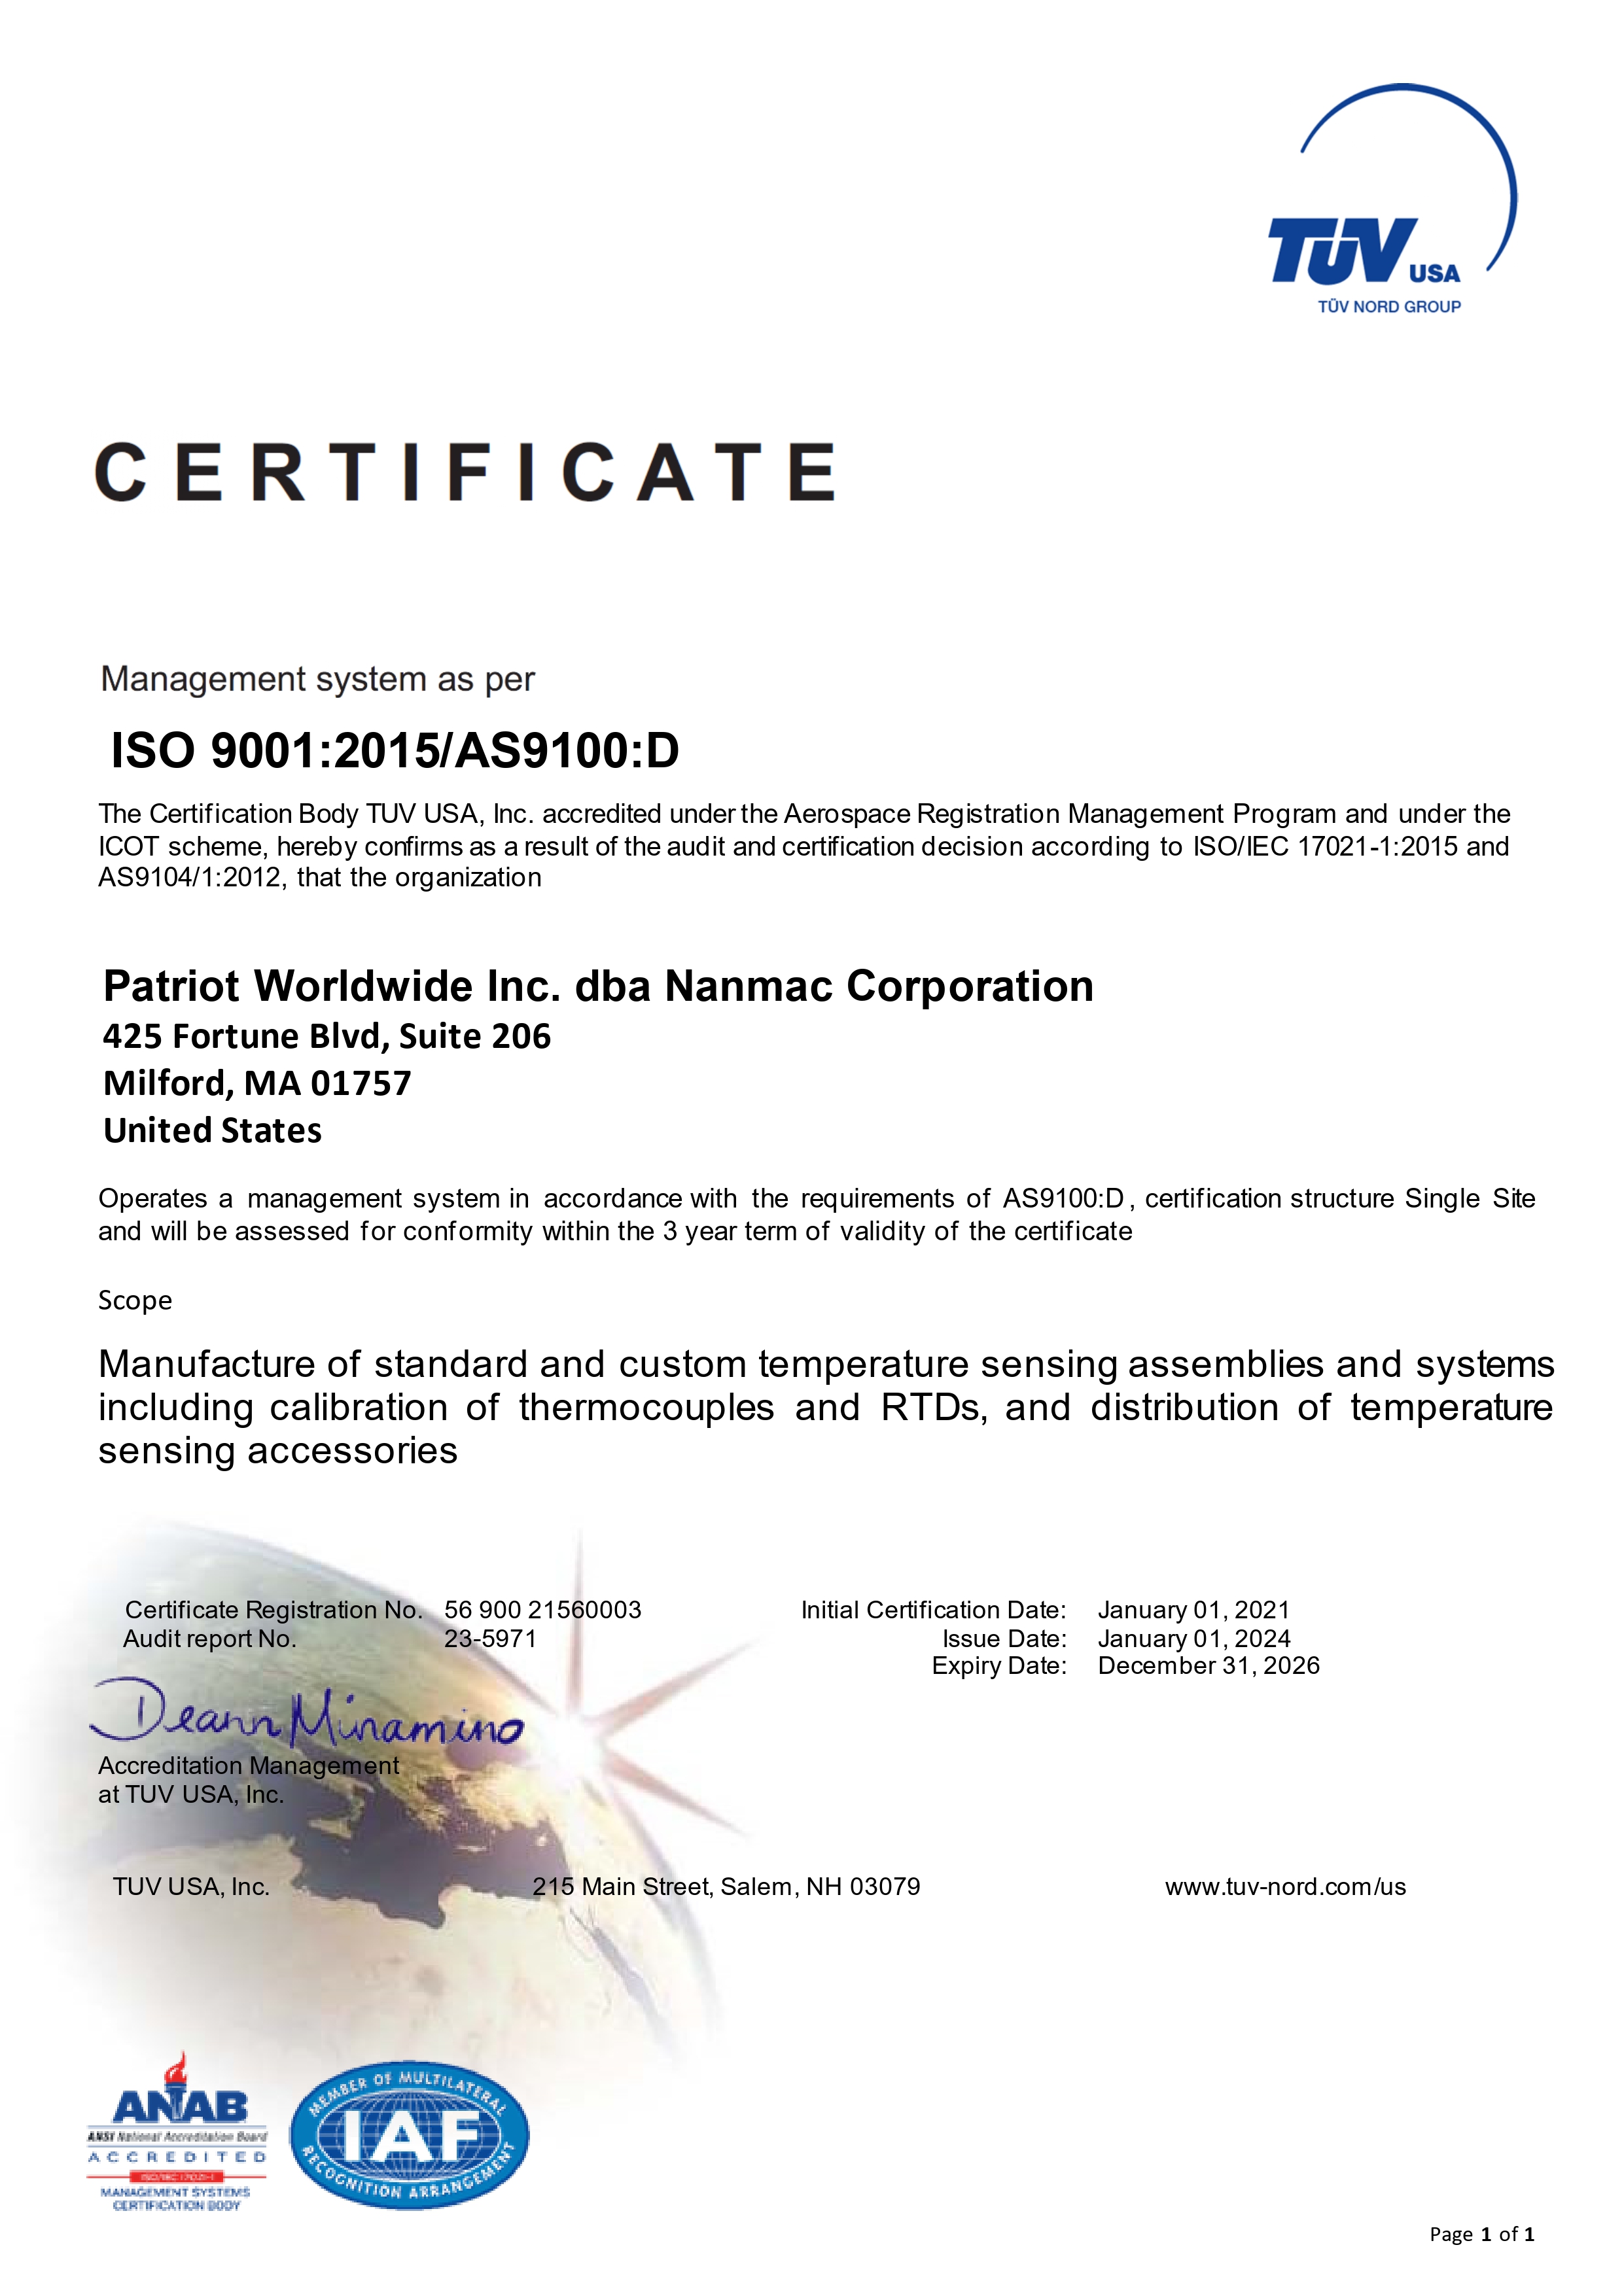 ISO 9001:2015/AS 9100 D Certification